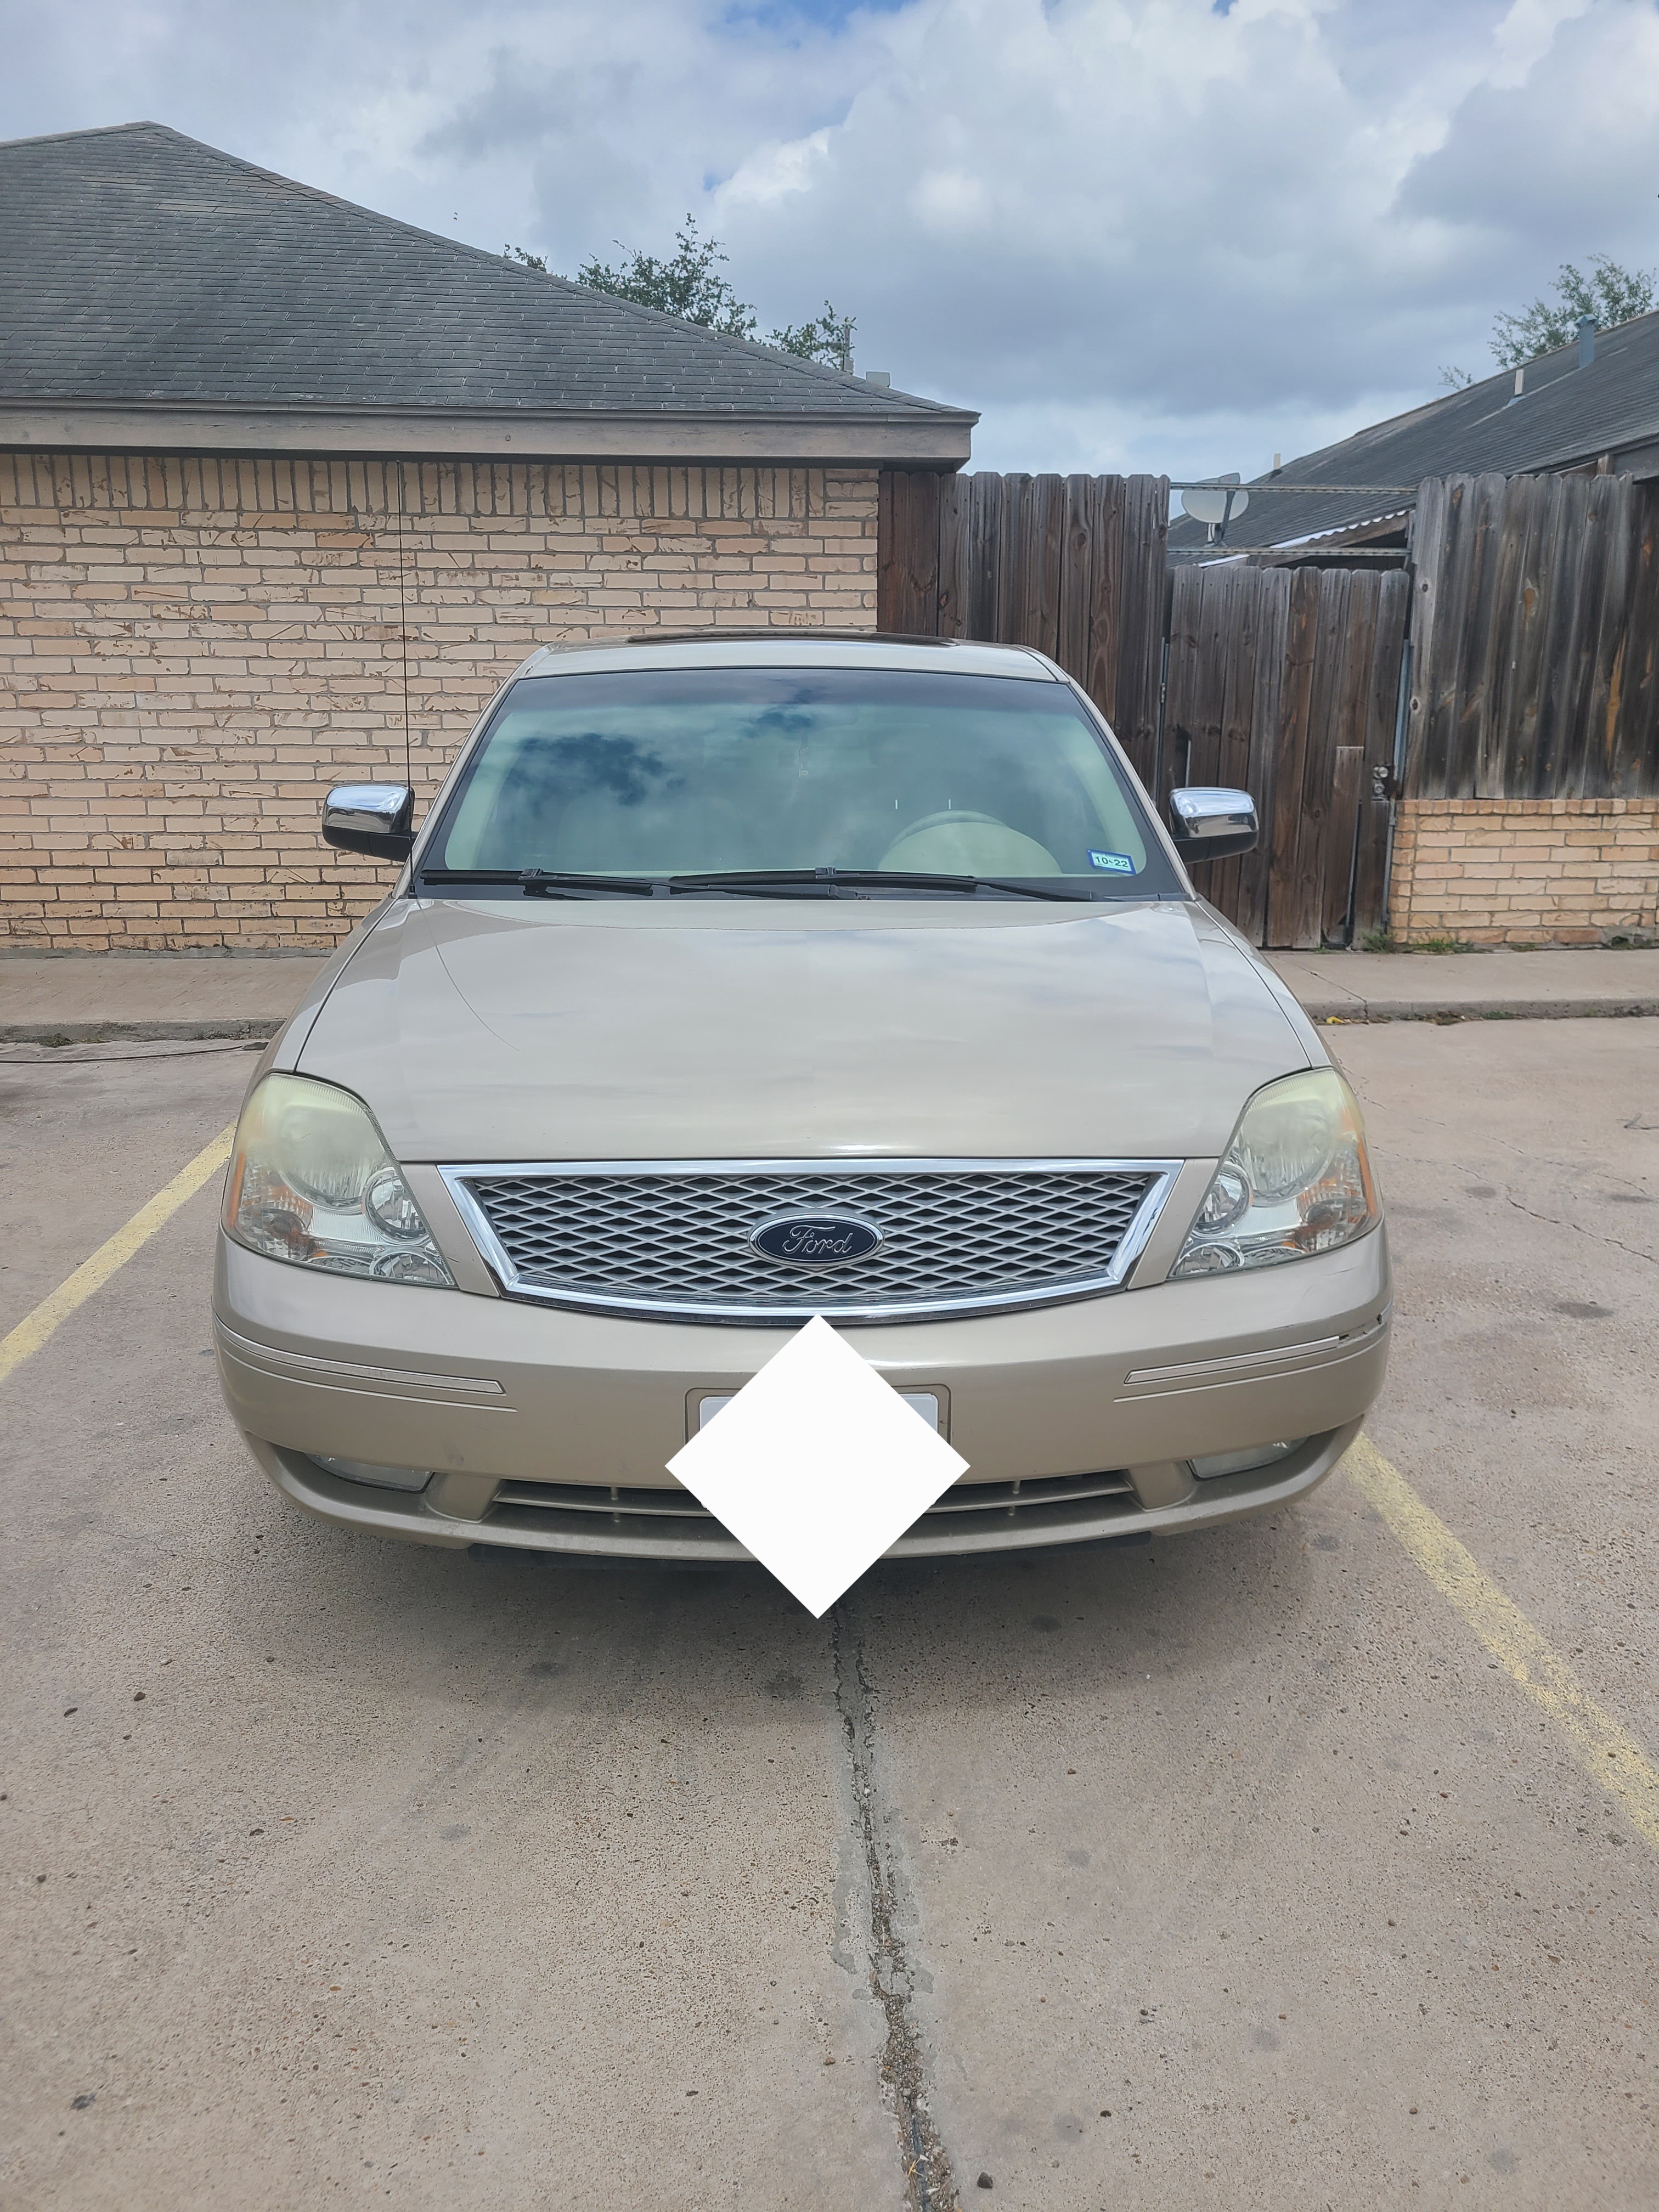 Used 2005 Ford Five Hundred for Sale Near Me | Cars.com